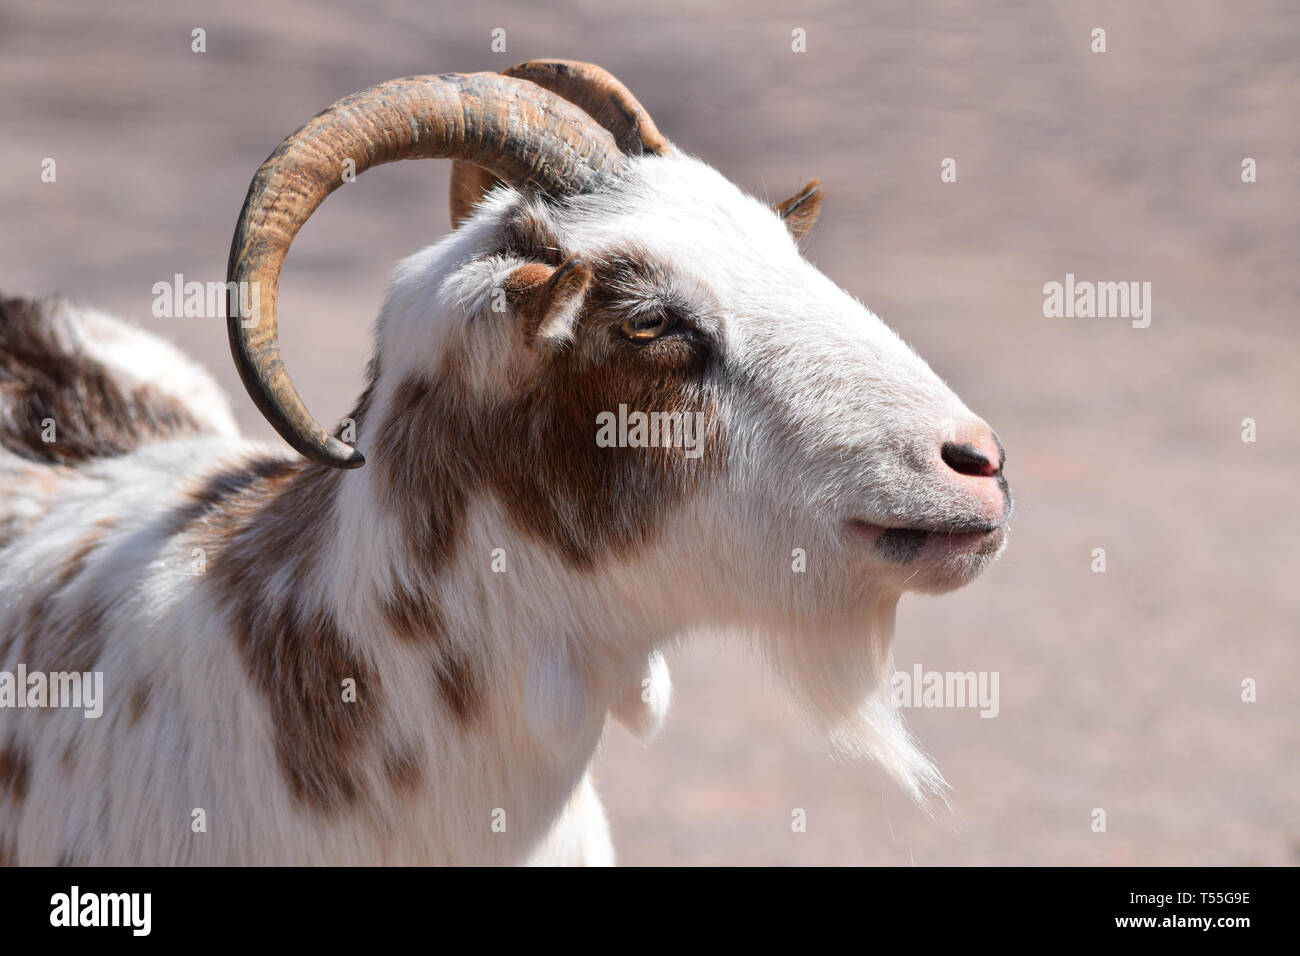 Billy Goat Close Up Stock Photo